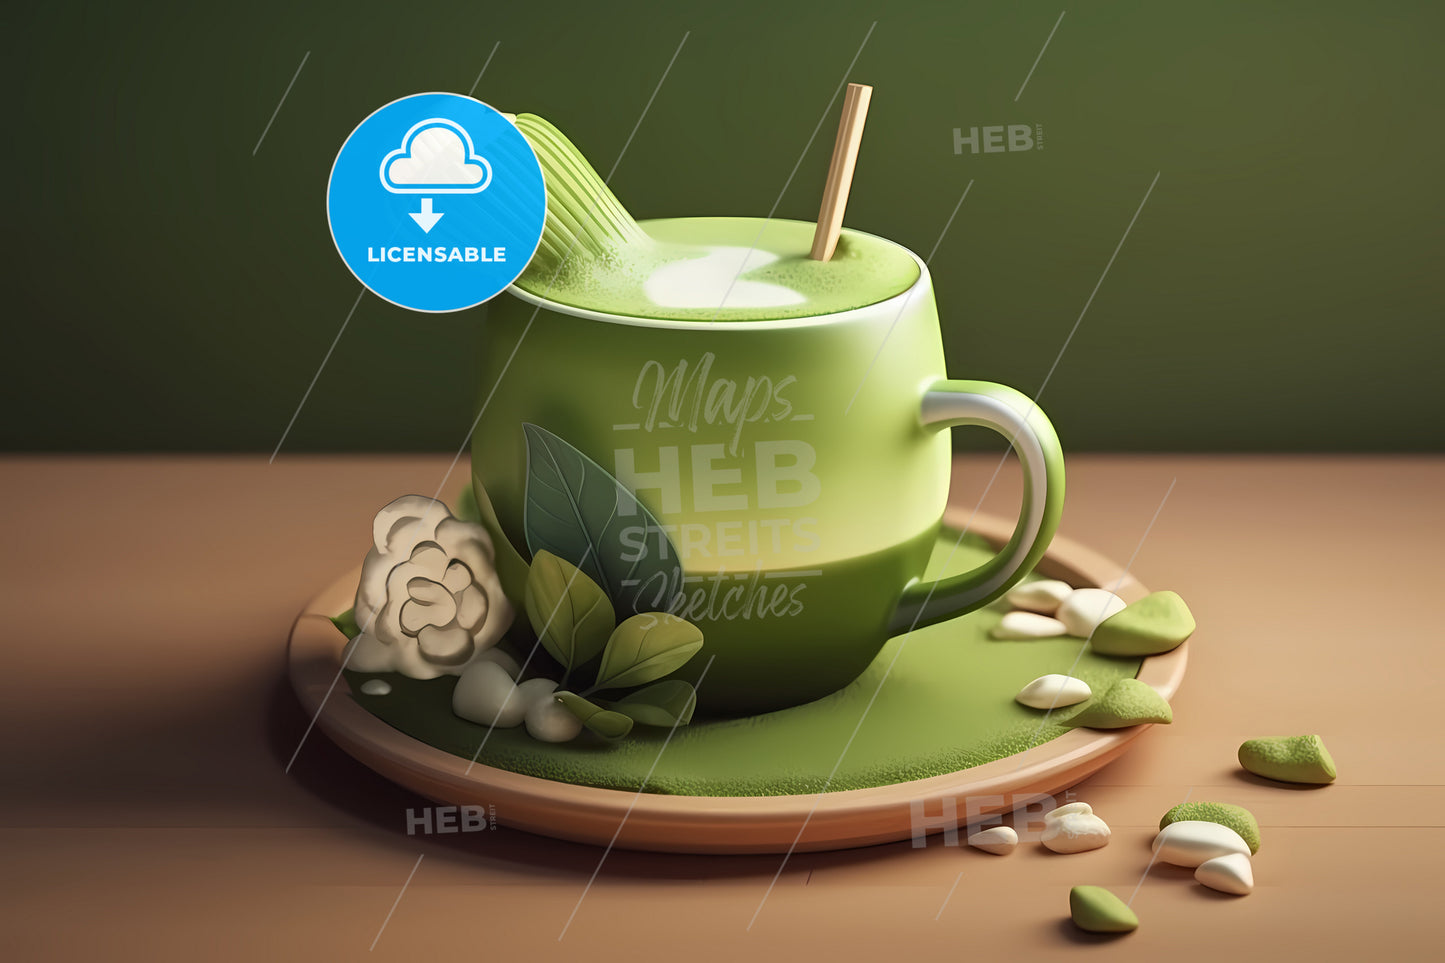 Japanese Matcha Latte In 3D Illustration, A Green Cup With A Straw And A Brush On A Plate